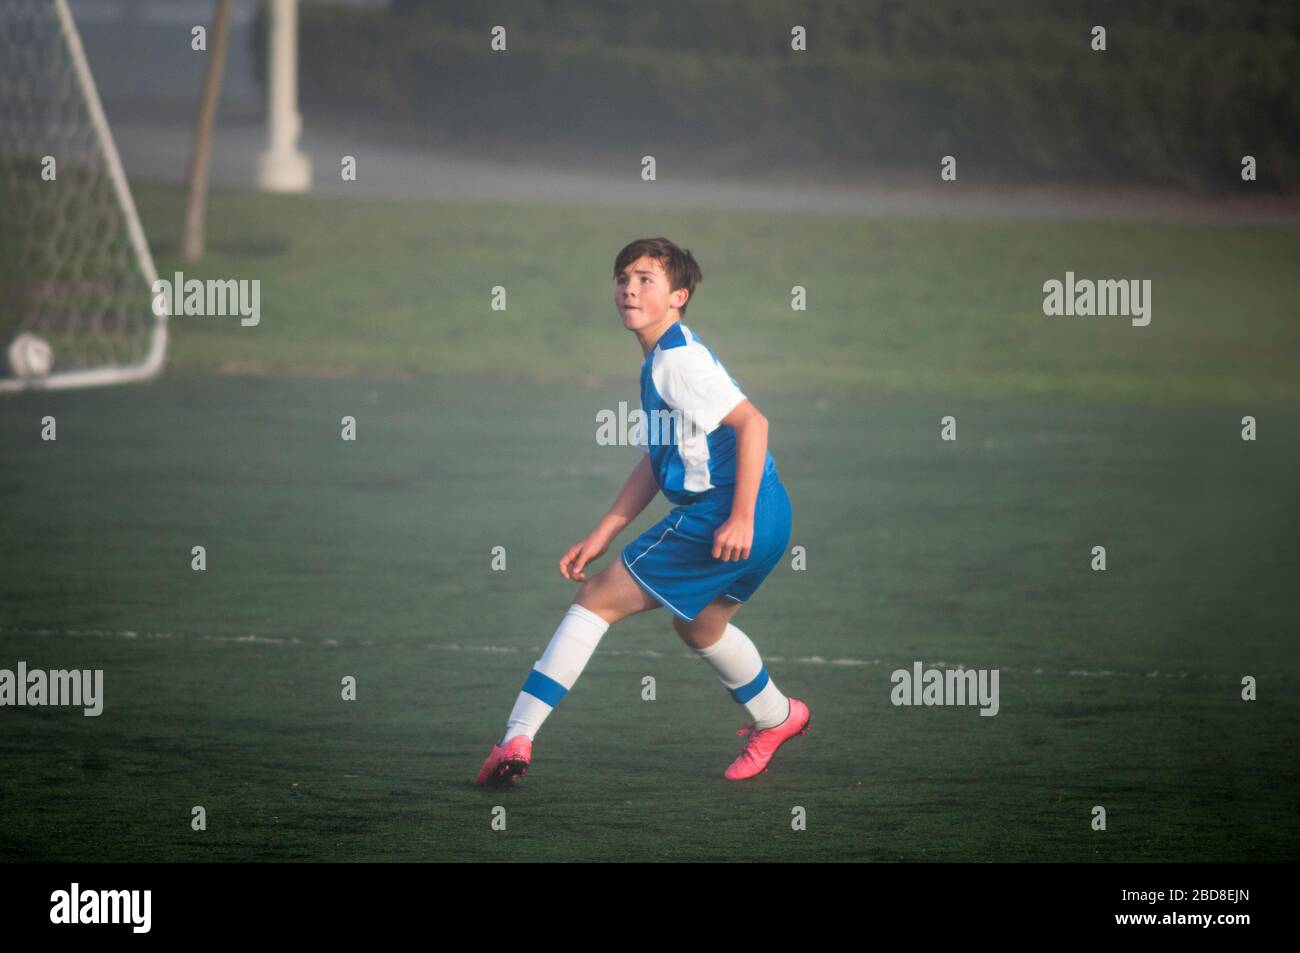 Teen soccer player ready to defend on a foggy field Stock Photo